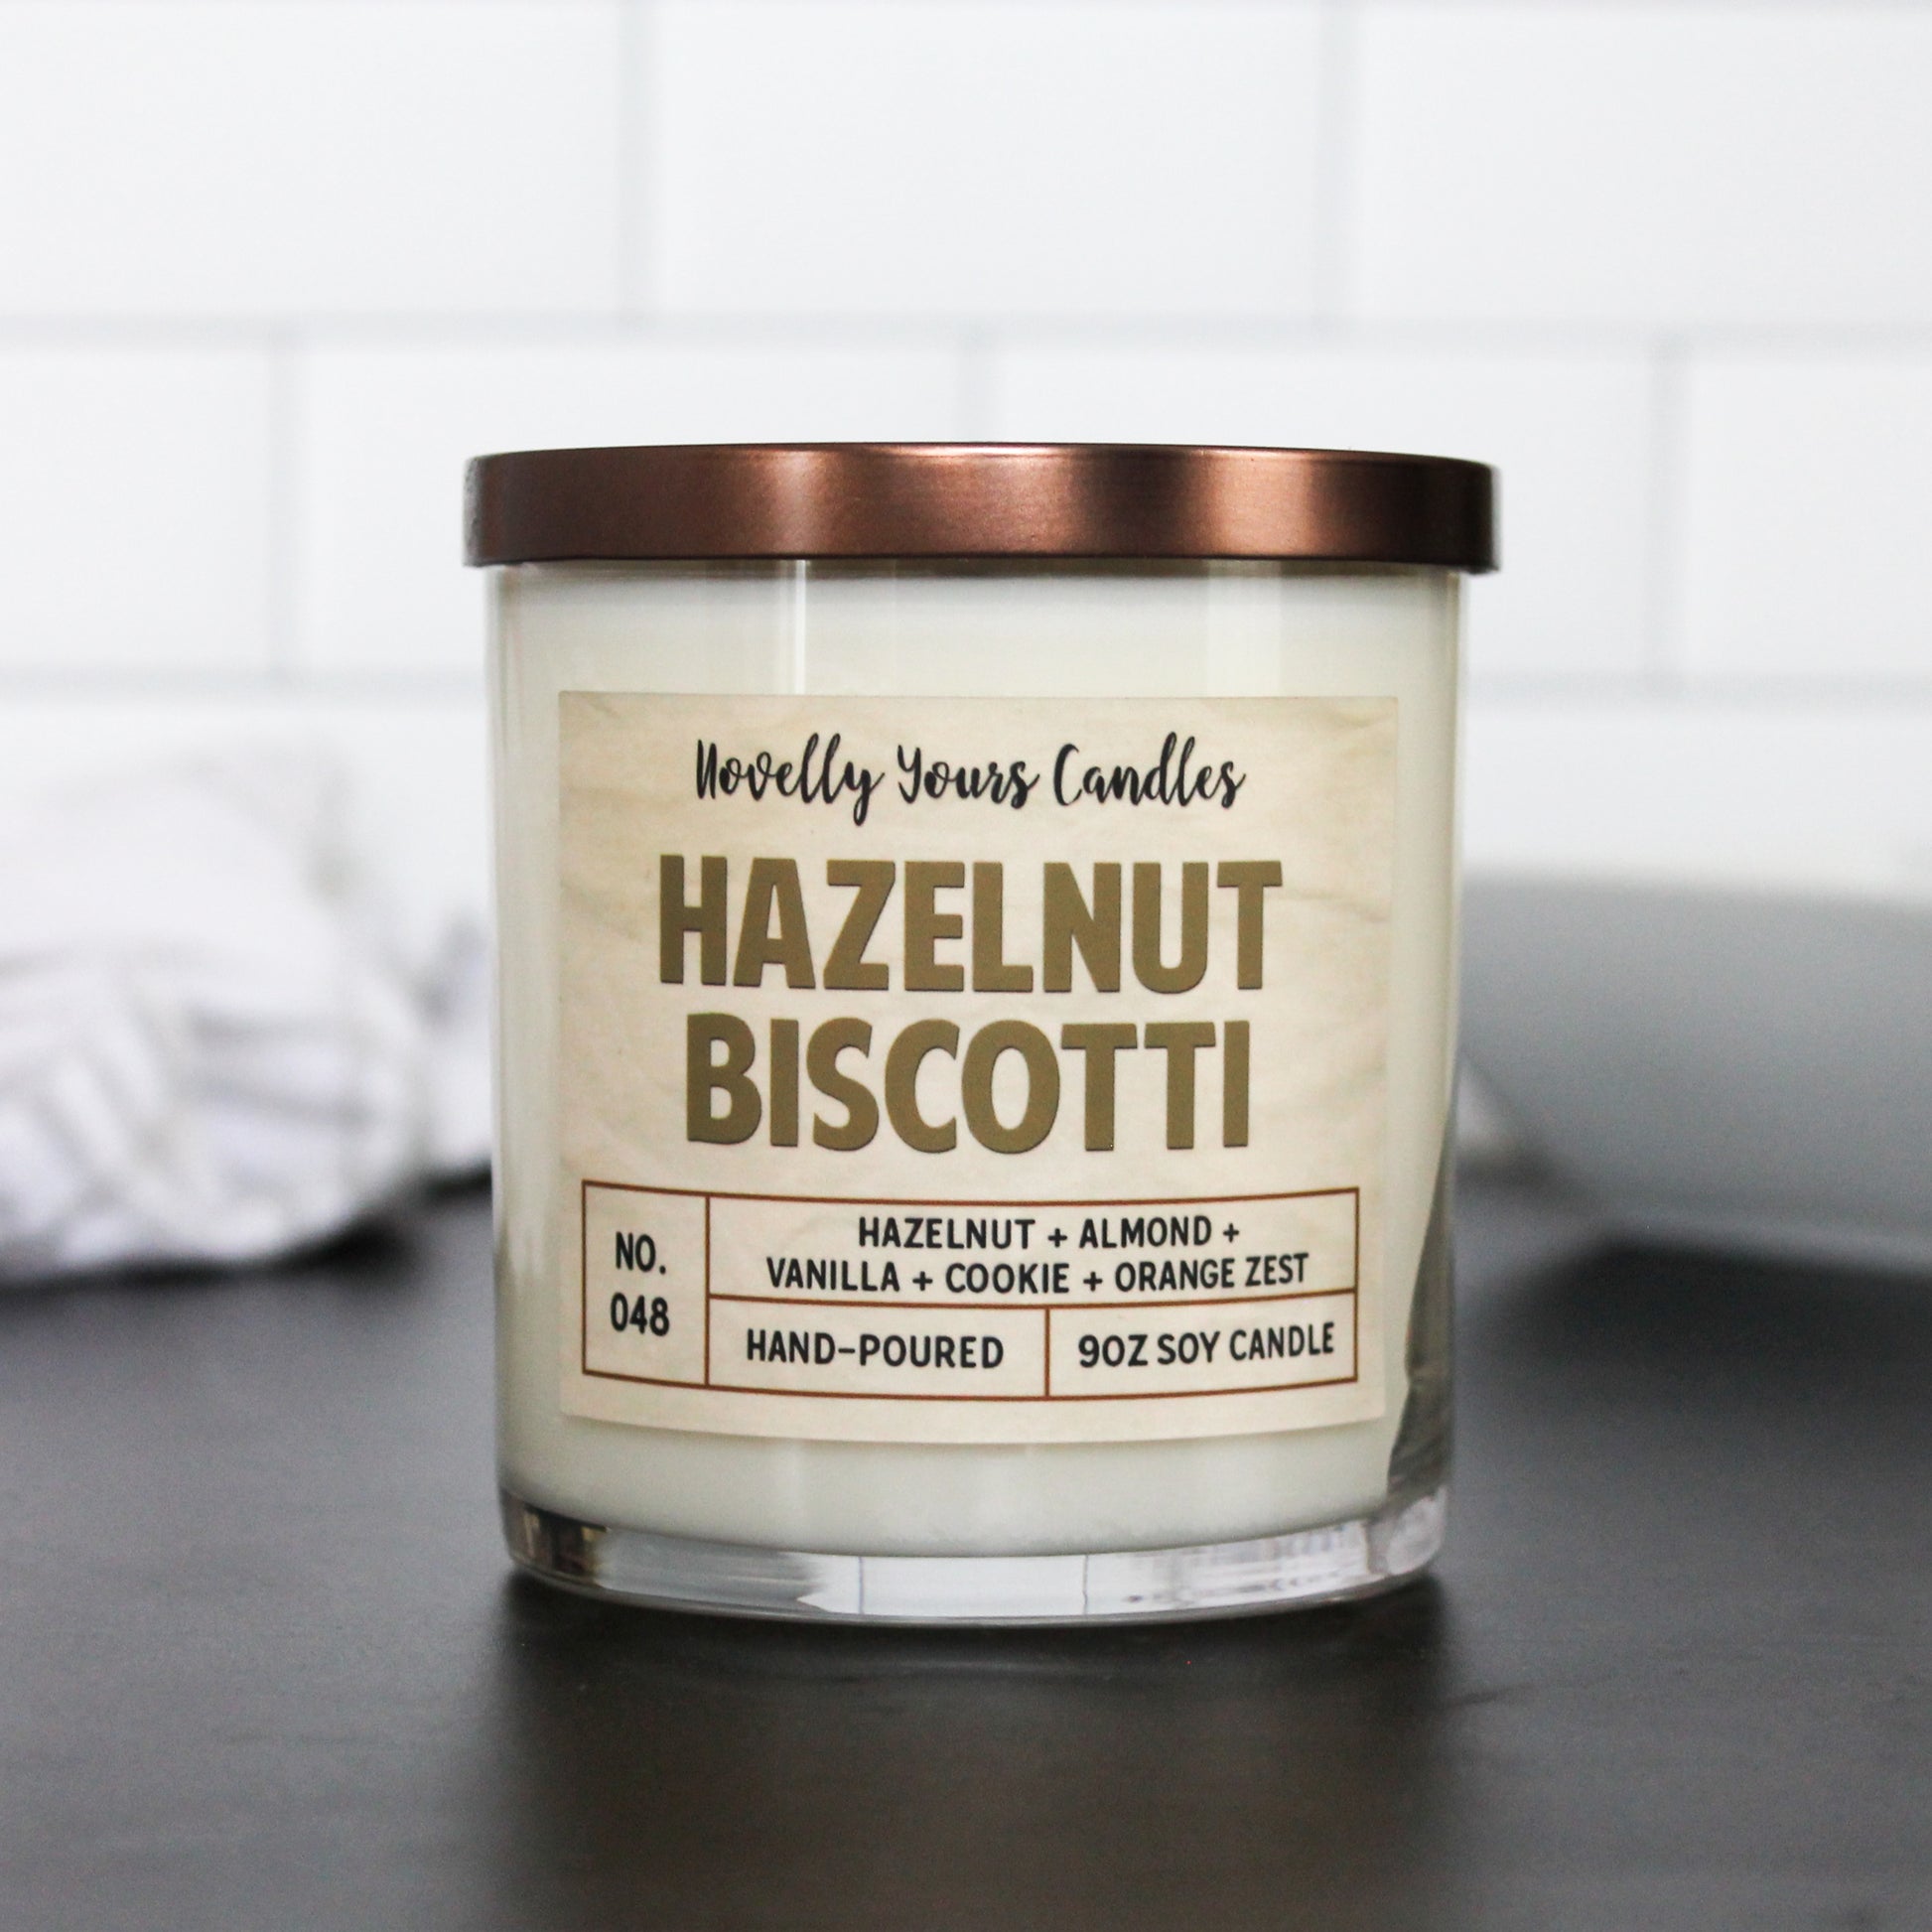 hazelnut biscotti named candle with title in dark tan. candle has bronze flat lid and is in clear jar, which sits on black surface with white tile background